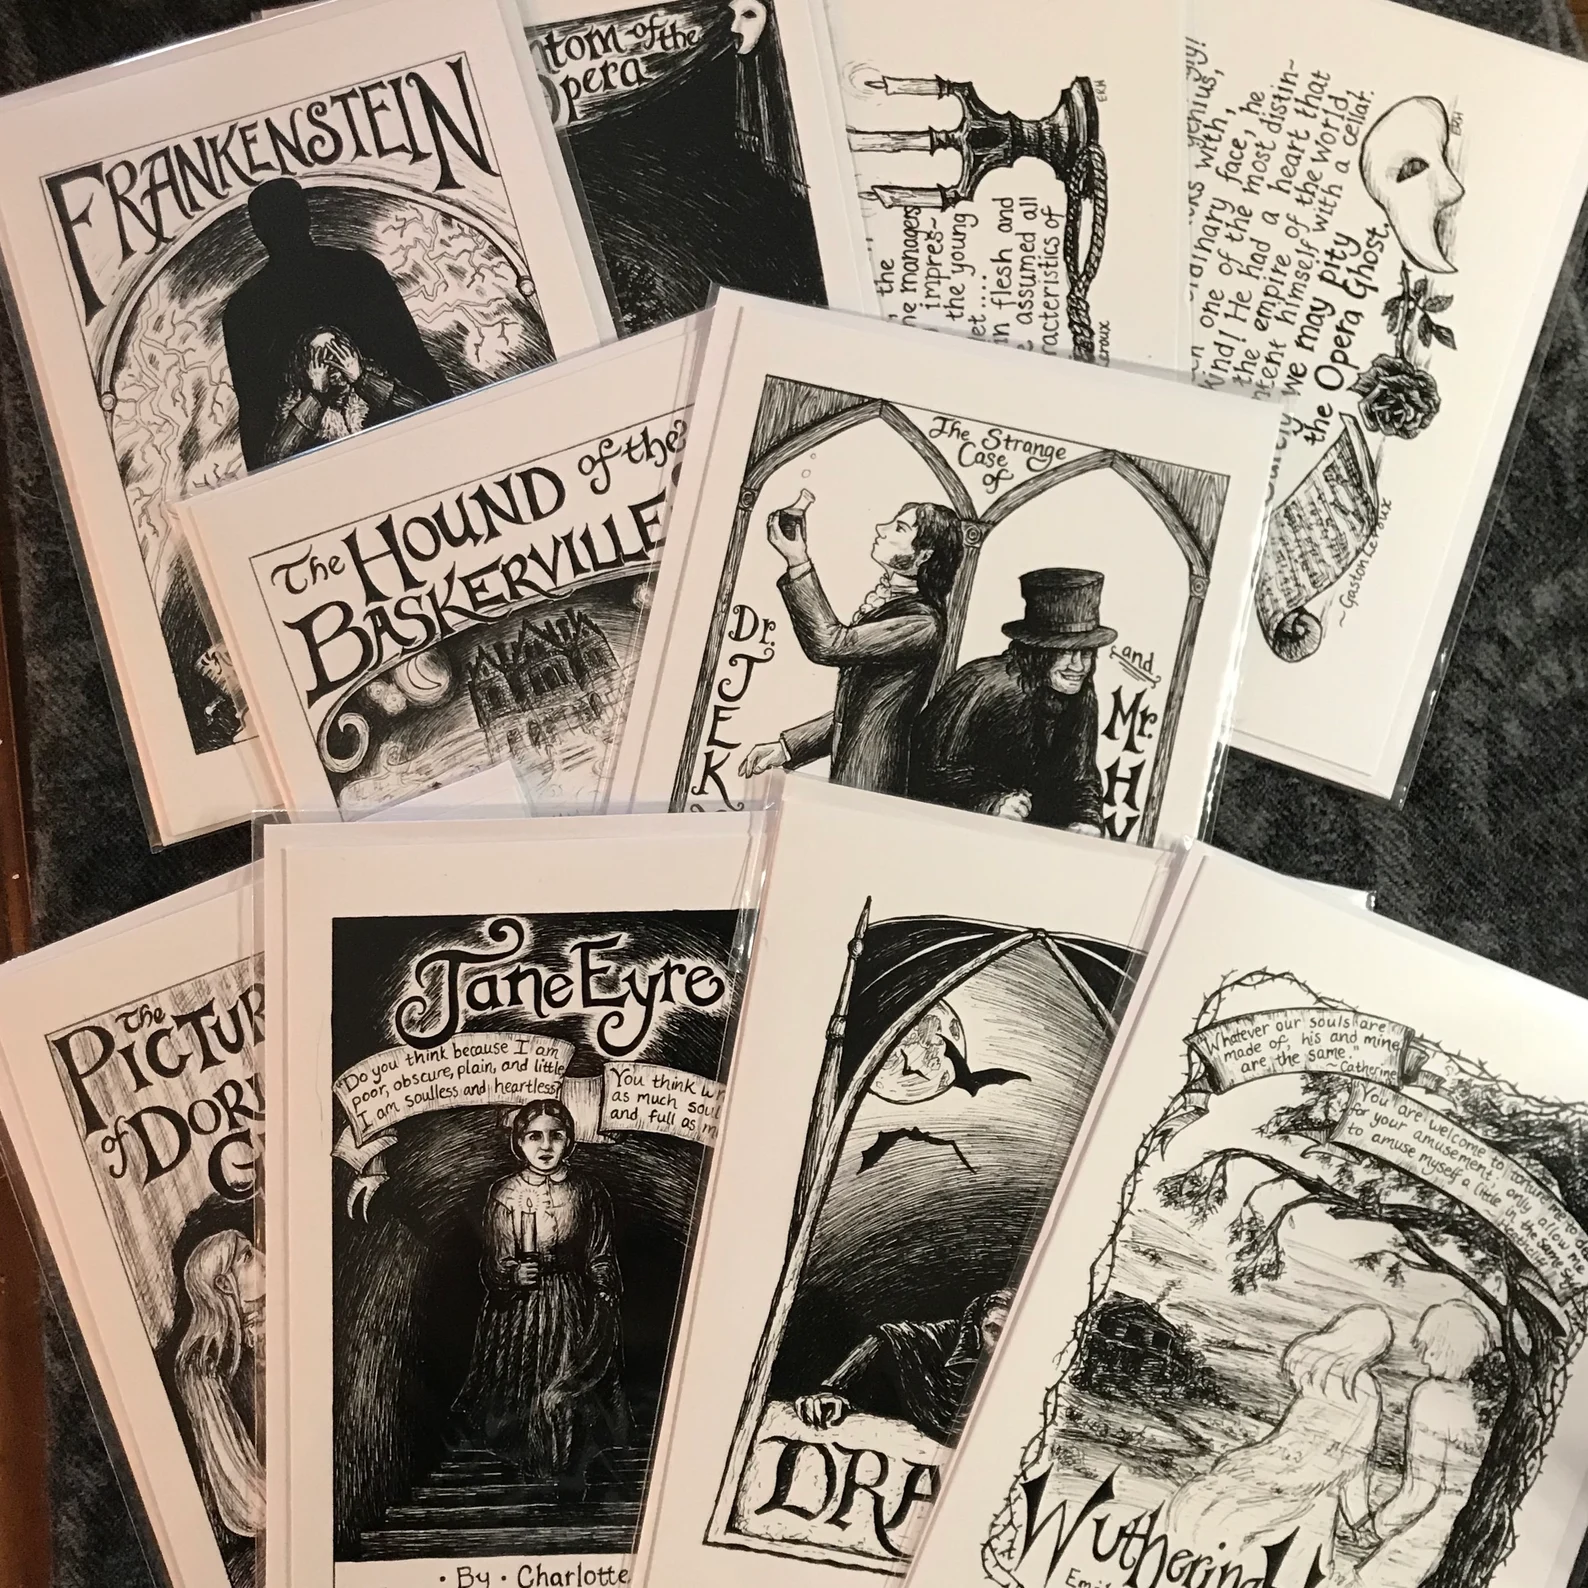 note cards with black-and-white illustrations depicting various gothic novels like Jane Eyre and Frankenstein.